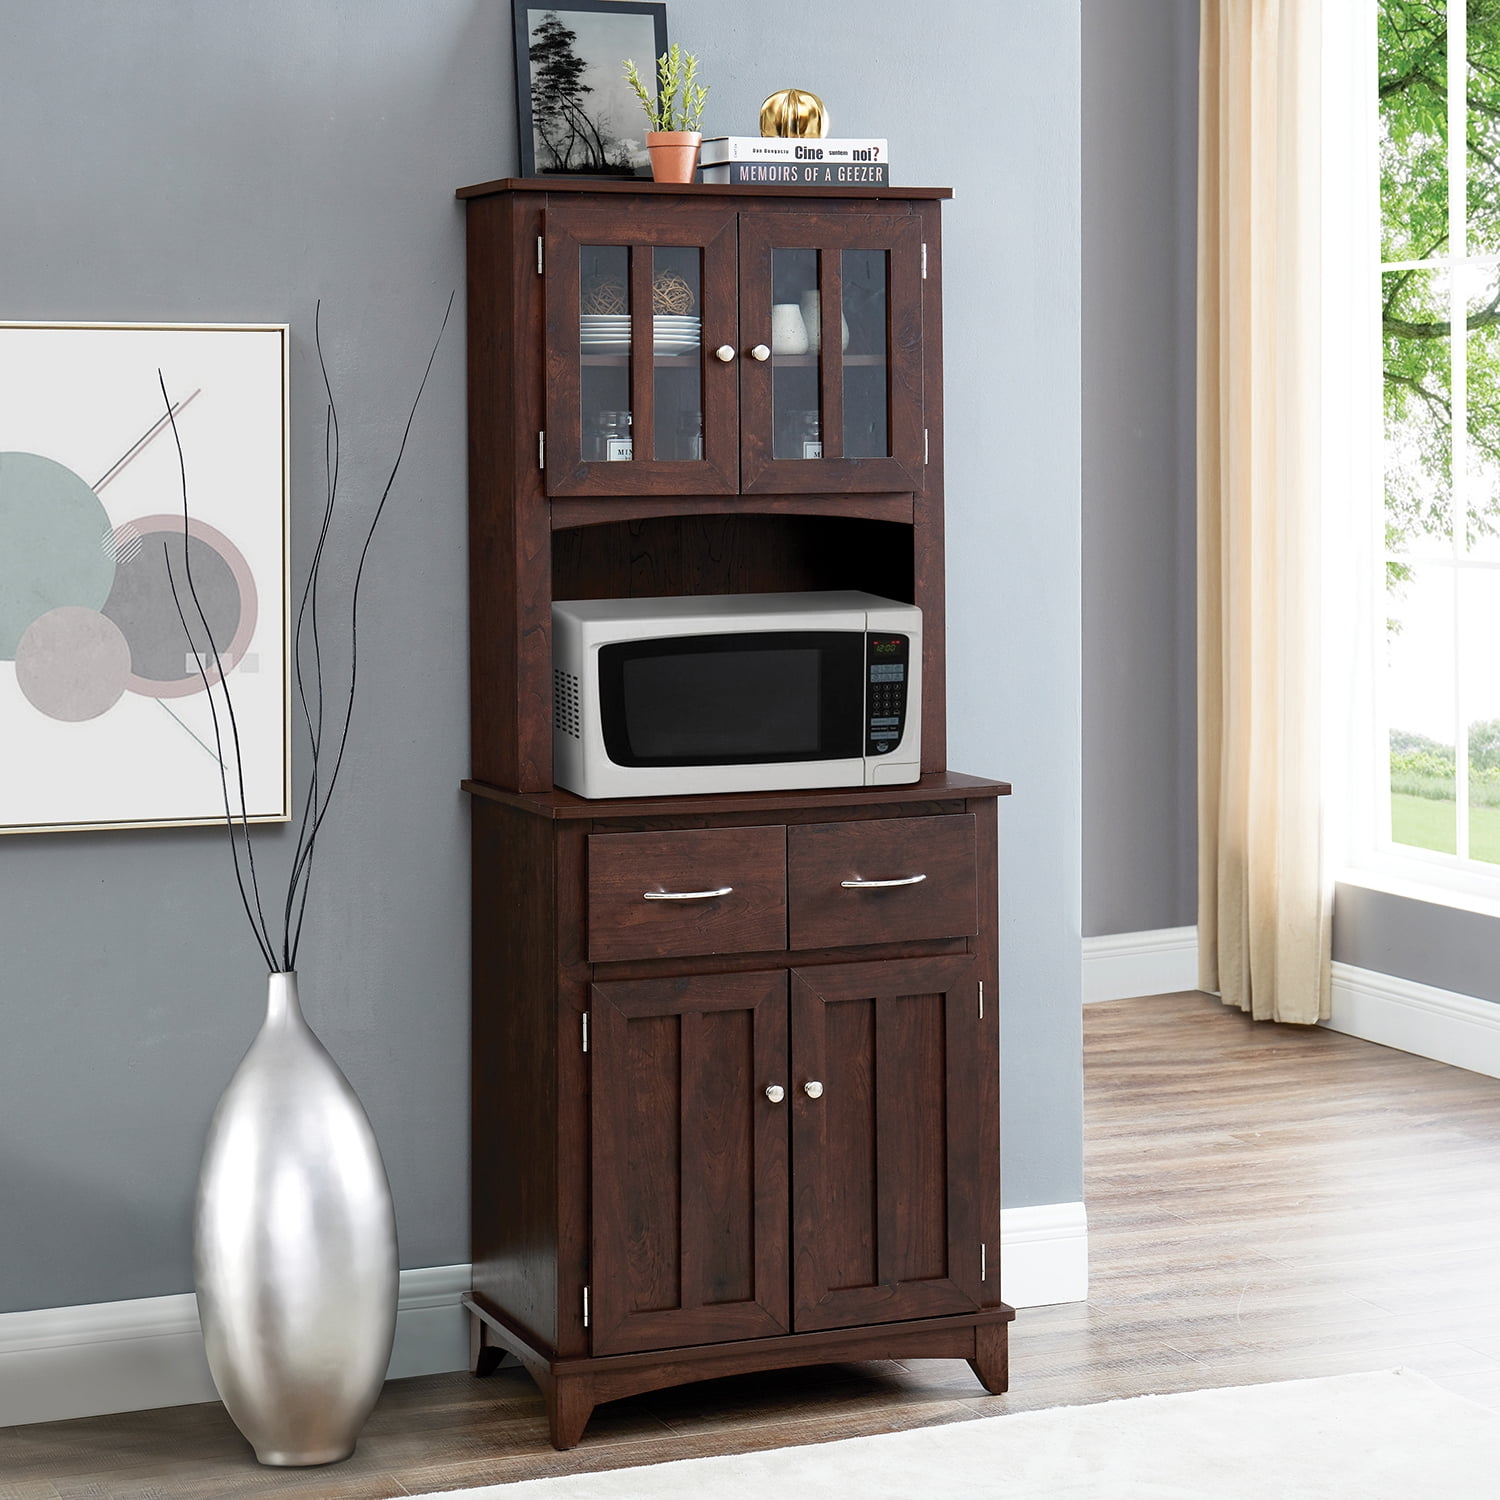 Wood Microwave Stand with Storage - Lifewit – Lifewitstore